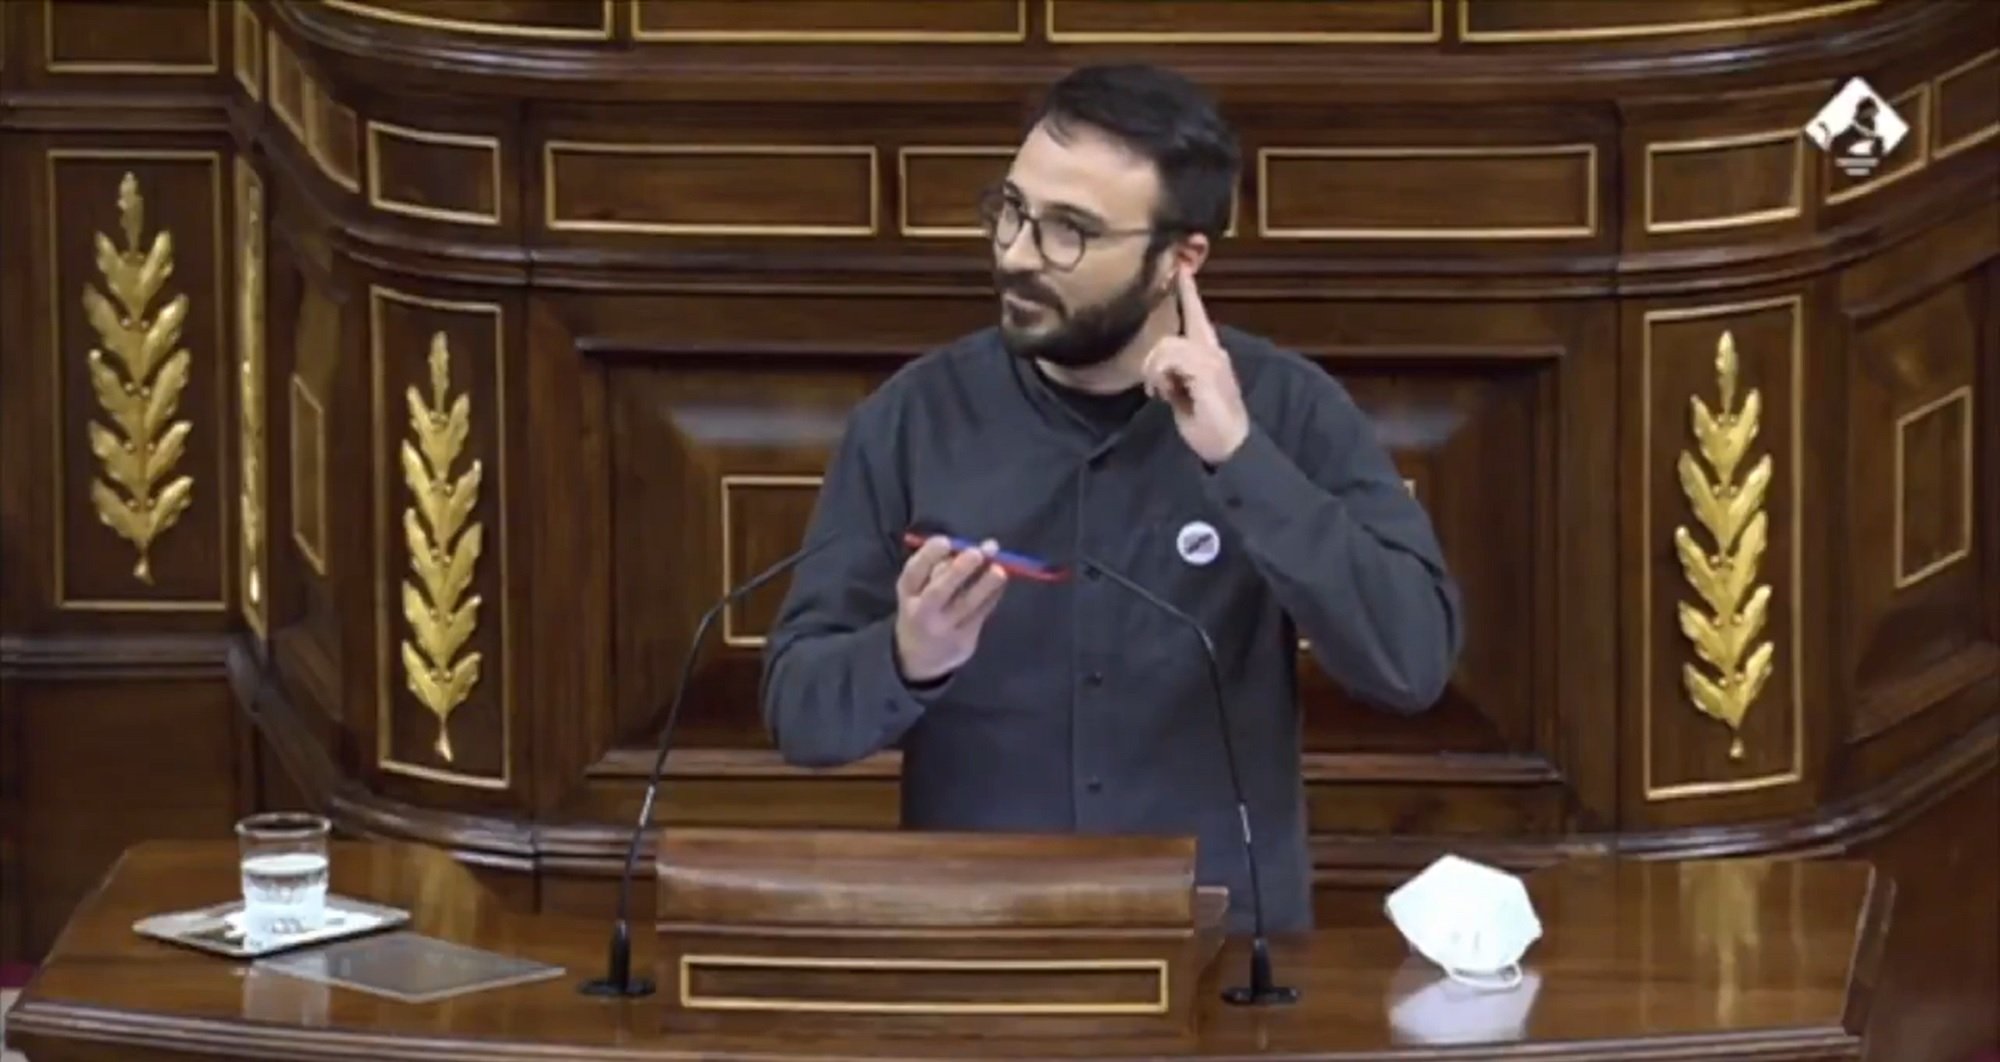 MP plays Hasél's music: “Today a singer is jailed in Spain, as in a sad dictatorship”